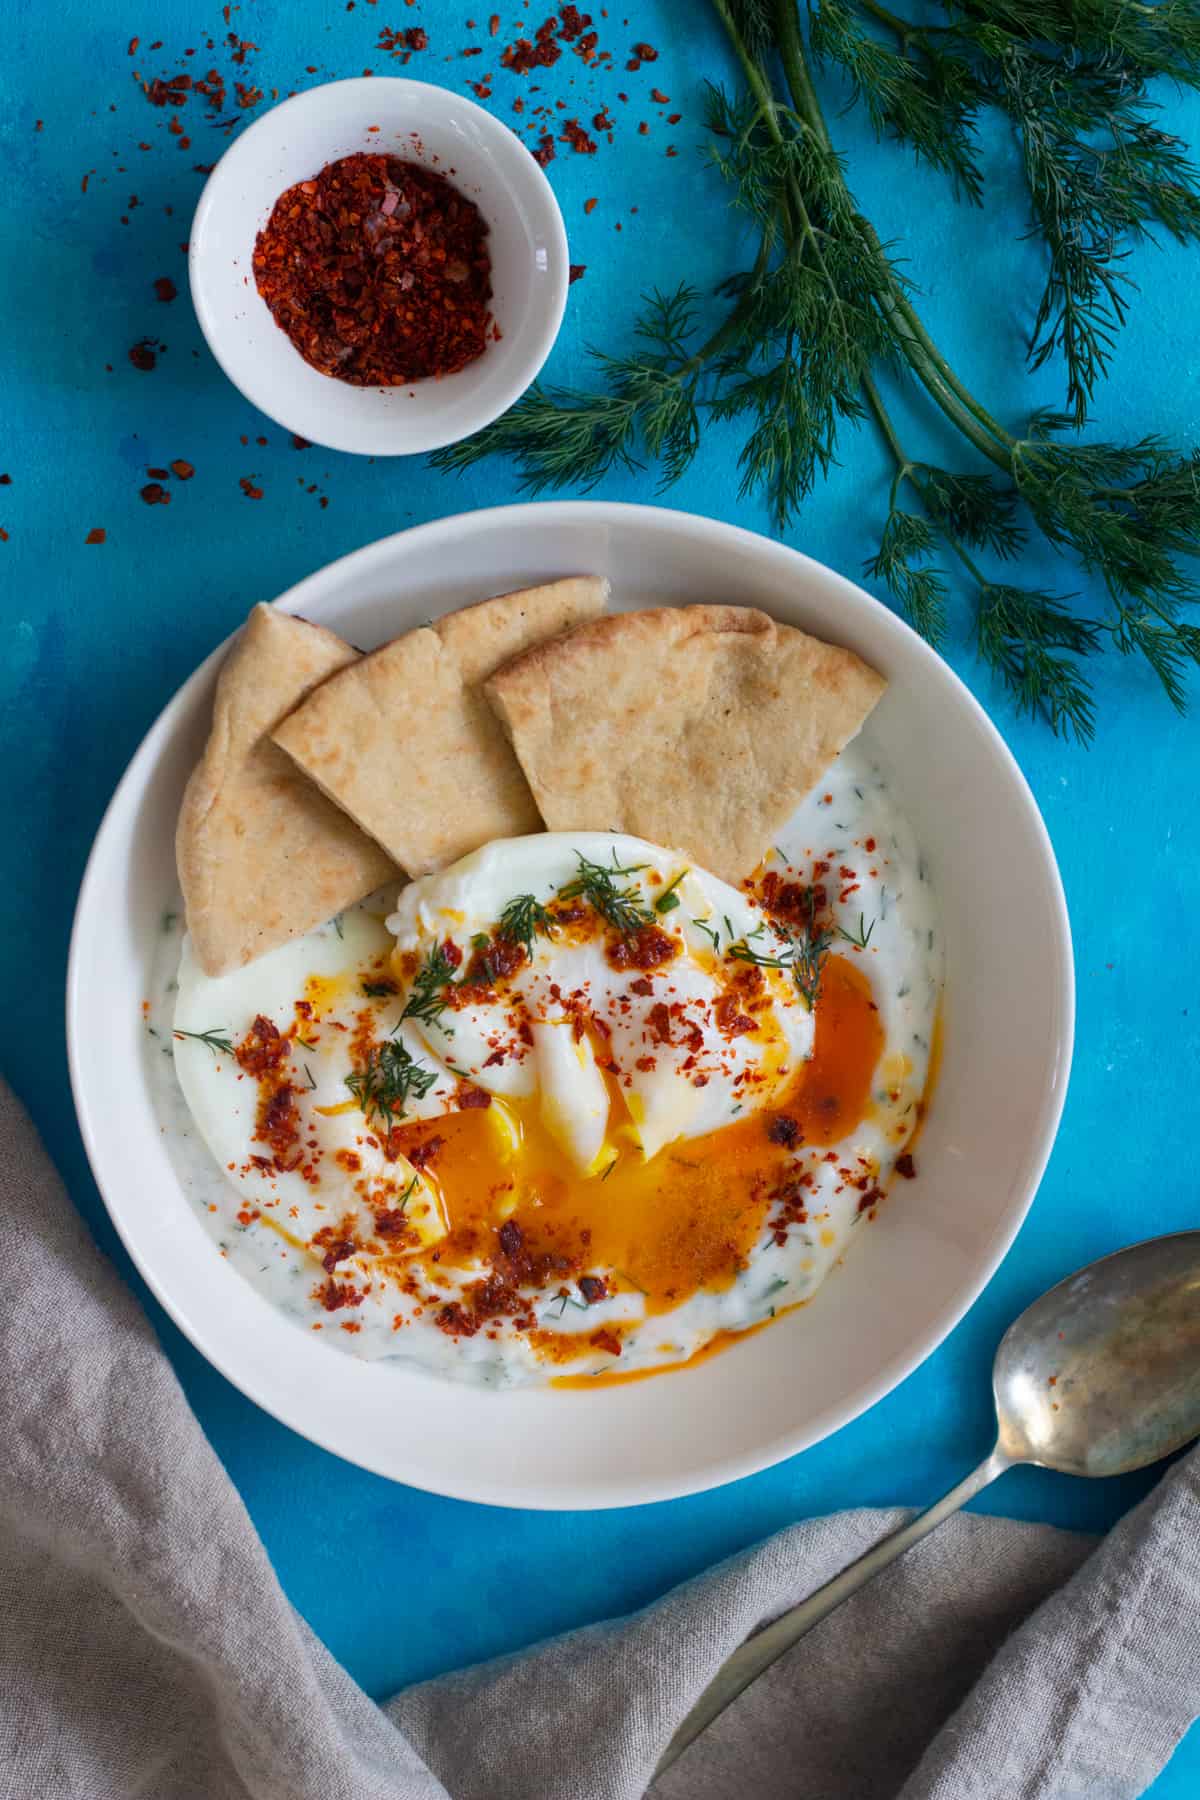 Cilbir is a delicious Turkish breakfast made with poached eggs and a flavorful yogurt sauce. These Turkish poached eggs are a great option for brunch option.